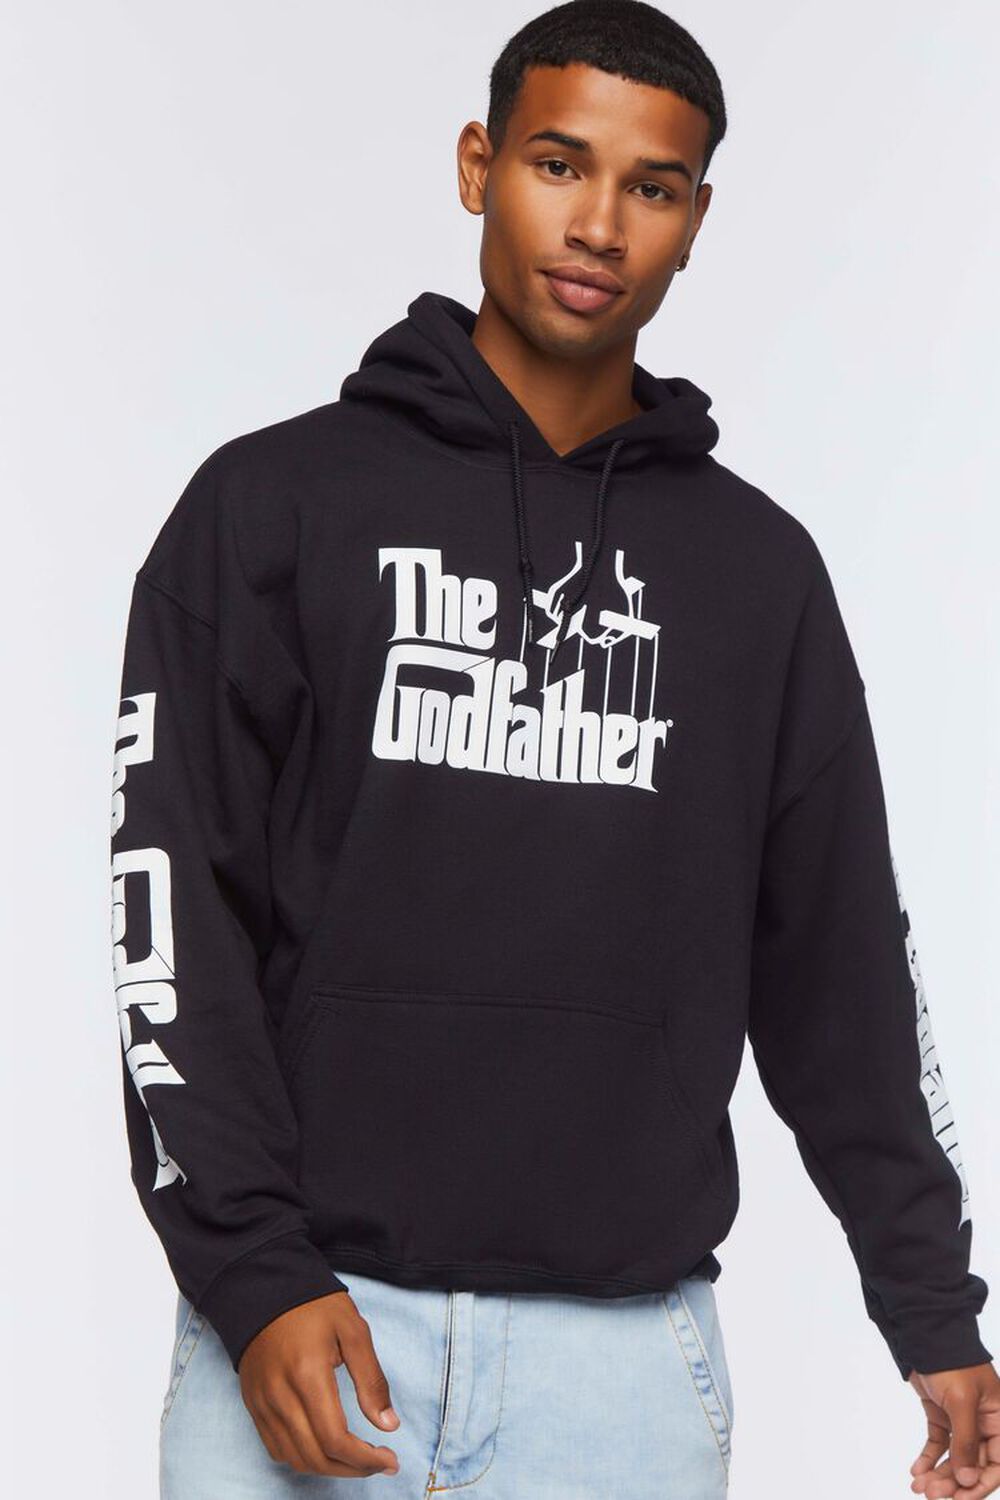 BLACK/WHITE The Godfather Graphic Hoodie, image 1